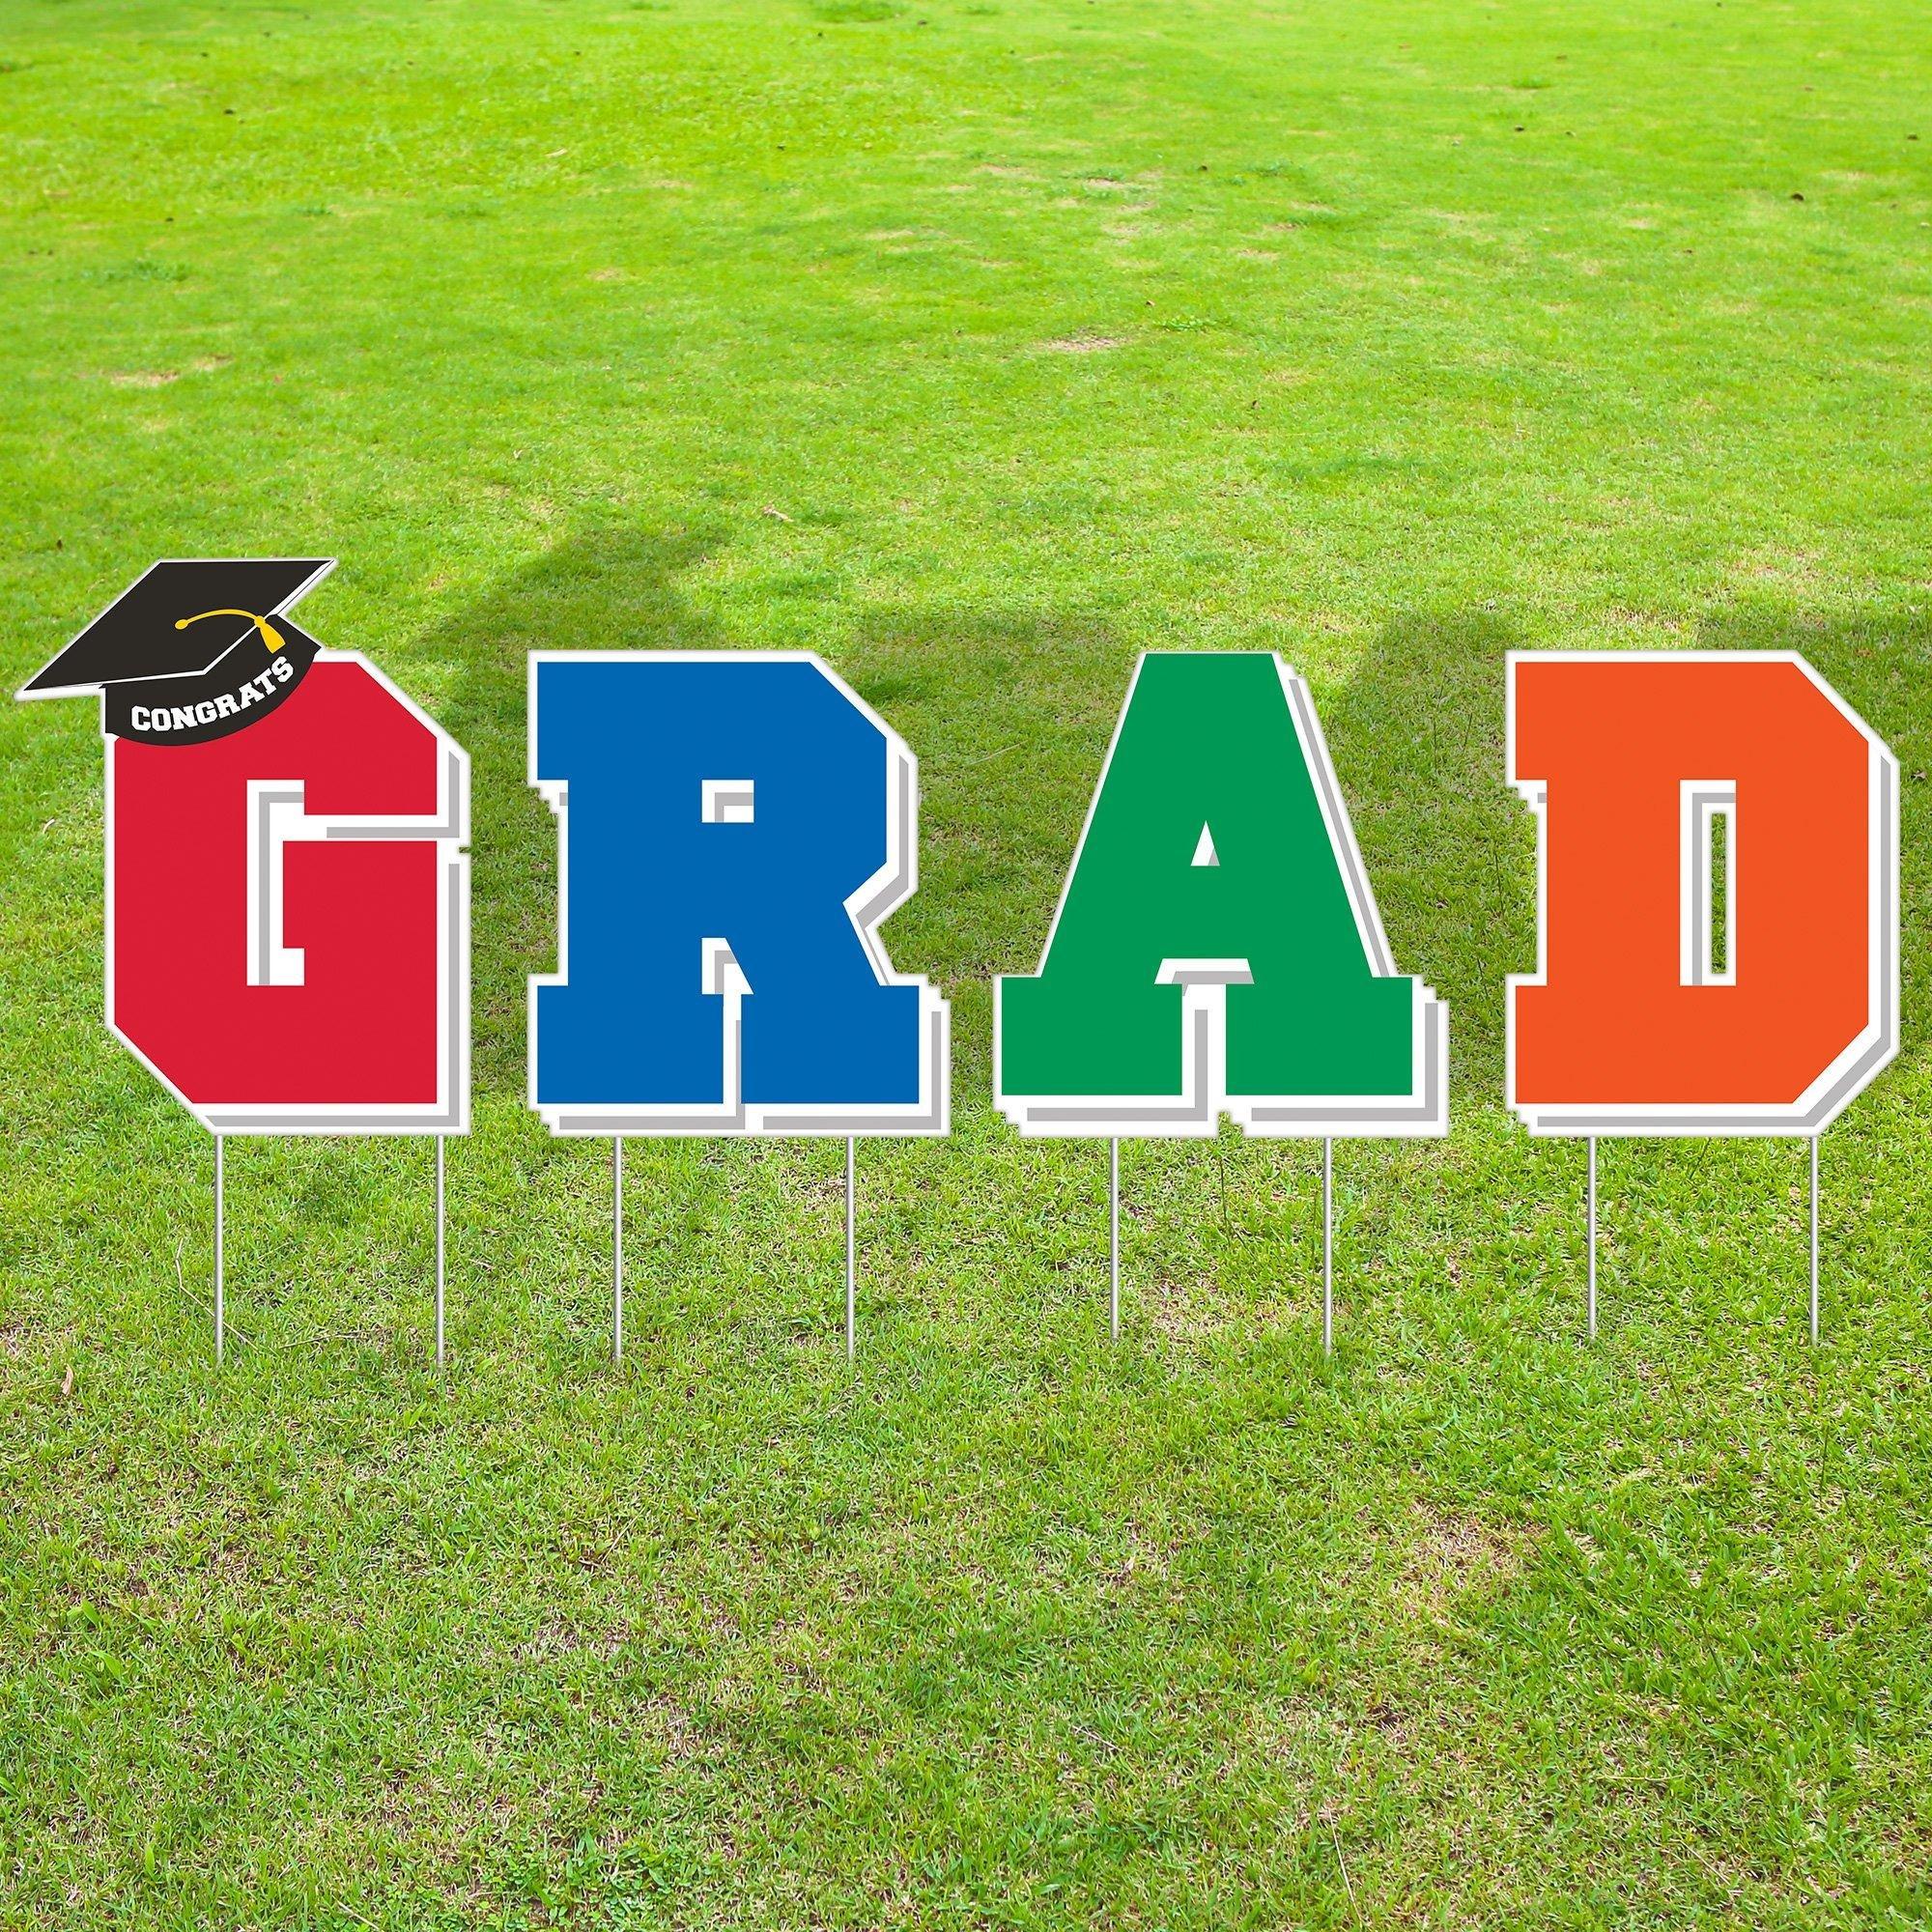 Graduation Party Outdoor Decorations Kit with Banners, Balloons, Yard Signs - Green 2024 Congrats Grad